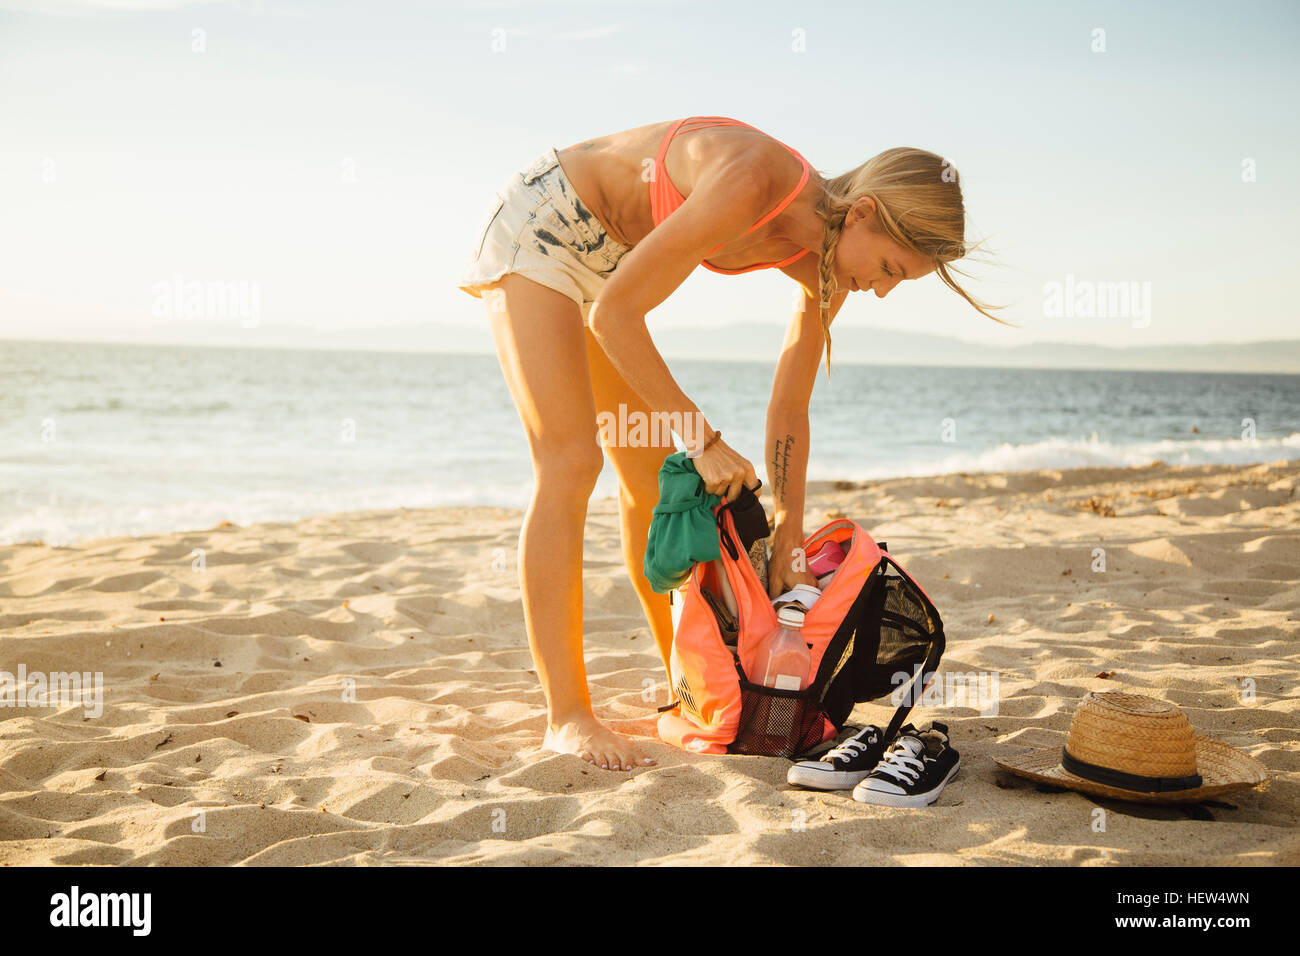 Woman on beach searching in back pack Stock Photo